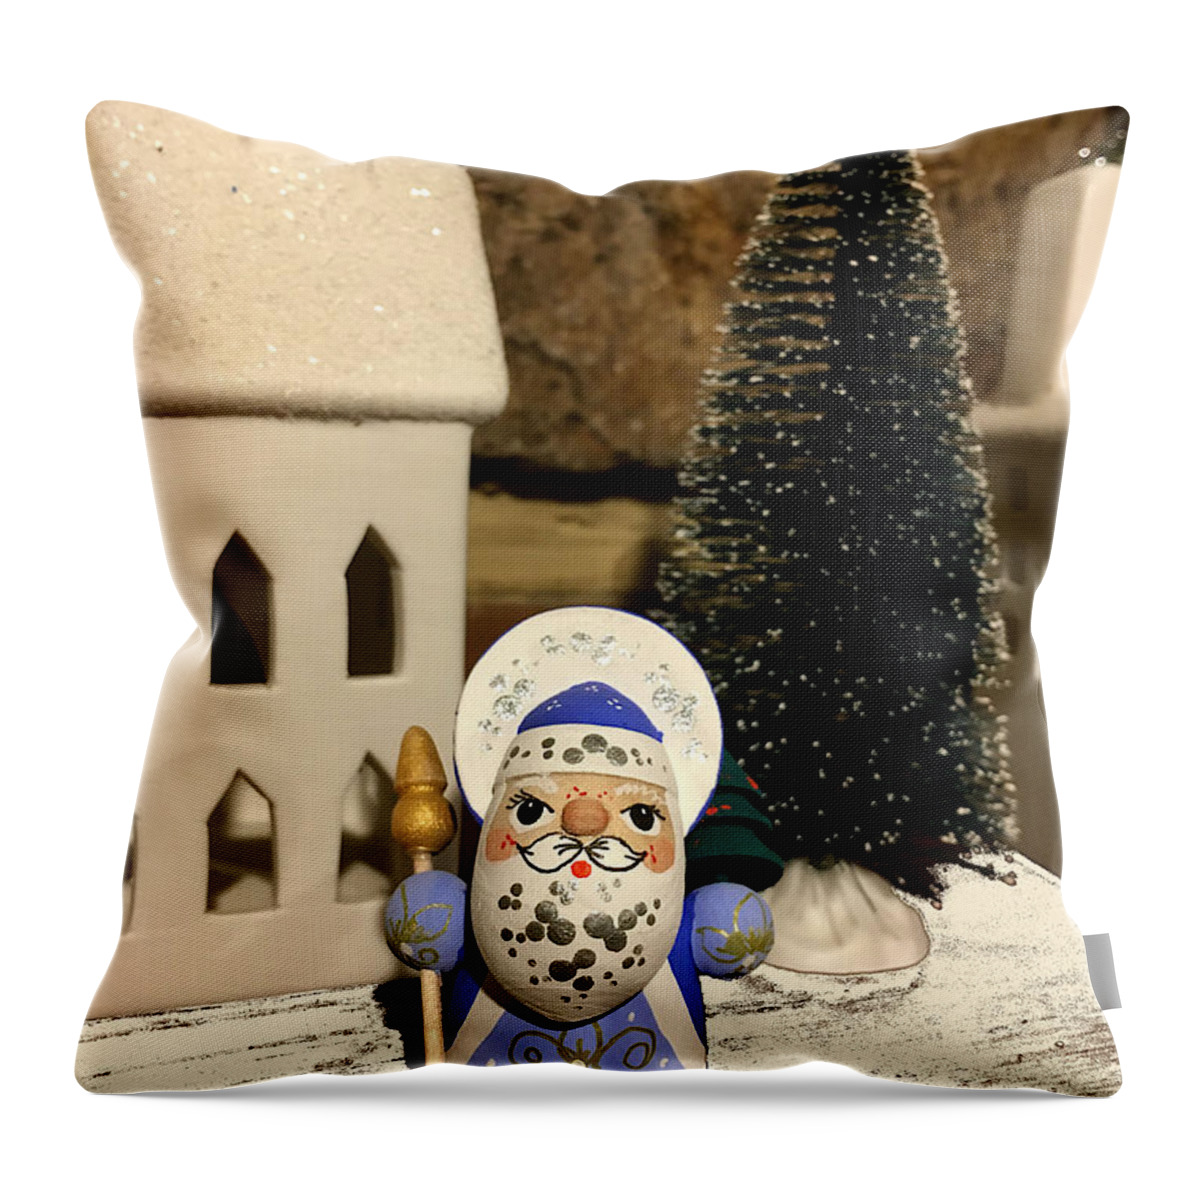 Richard Reeve Throw Pillow featuring the photograph Christmas King by Richard Reeve